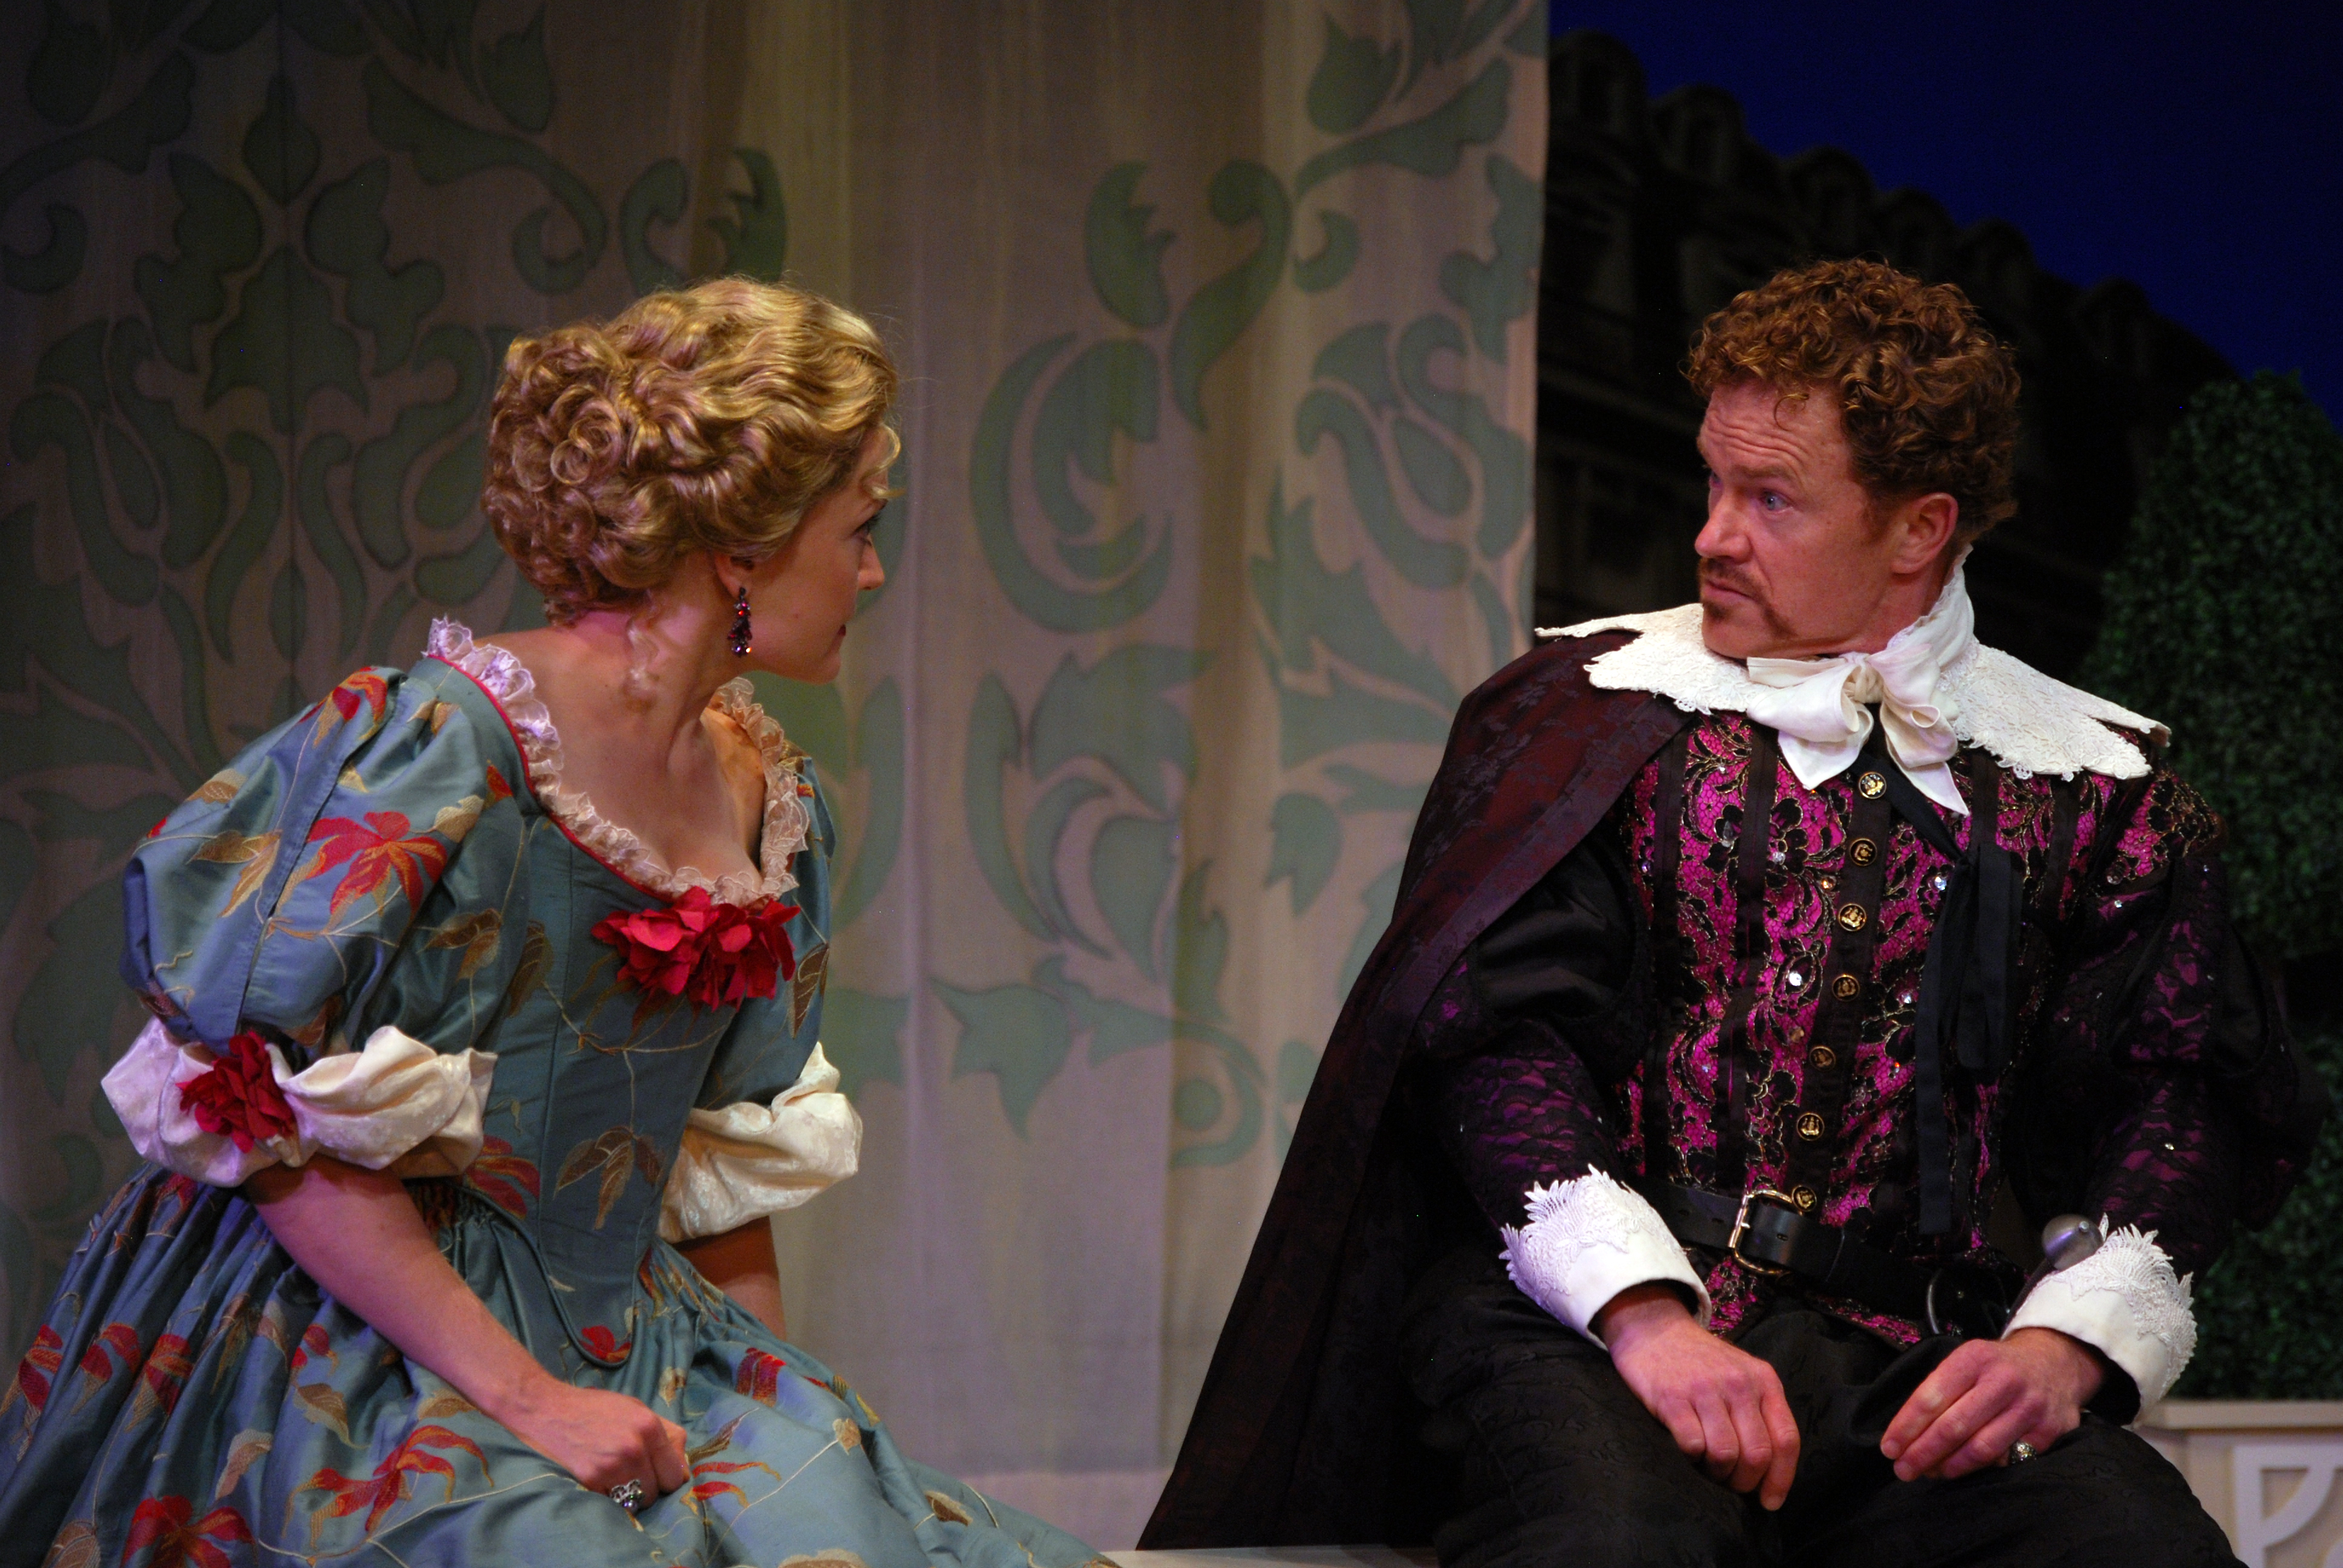 The Liar at Shakespeare Theatre of New Jersey. Jane Pfitsch as Clarice, Clark Carmichael as Alcippe